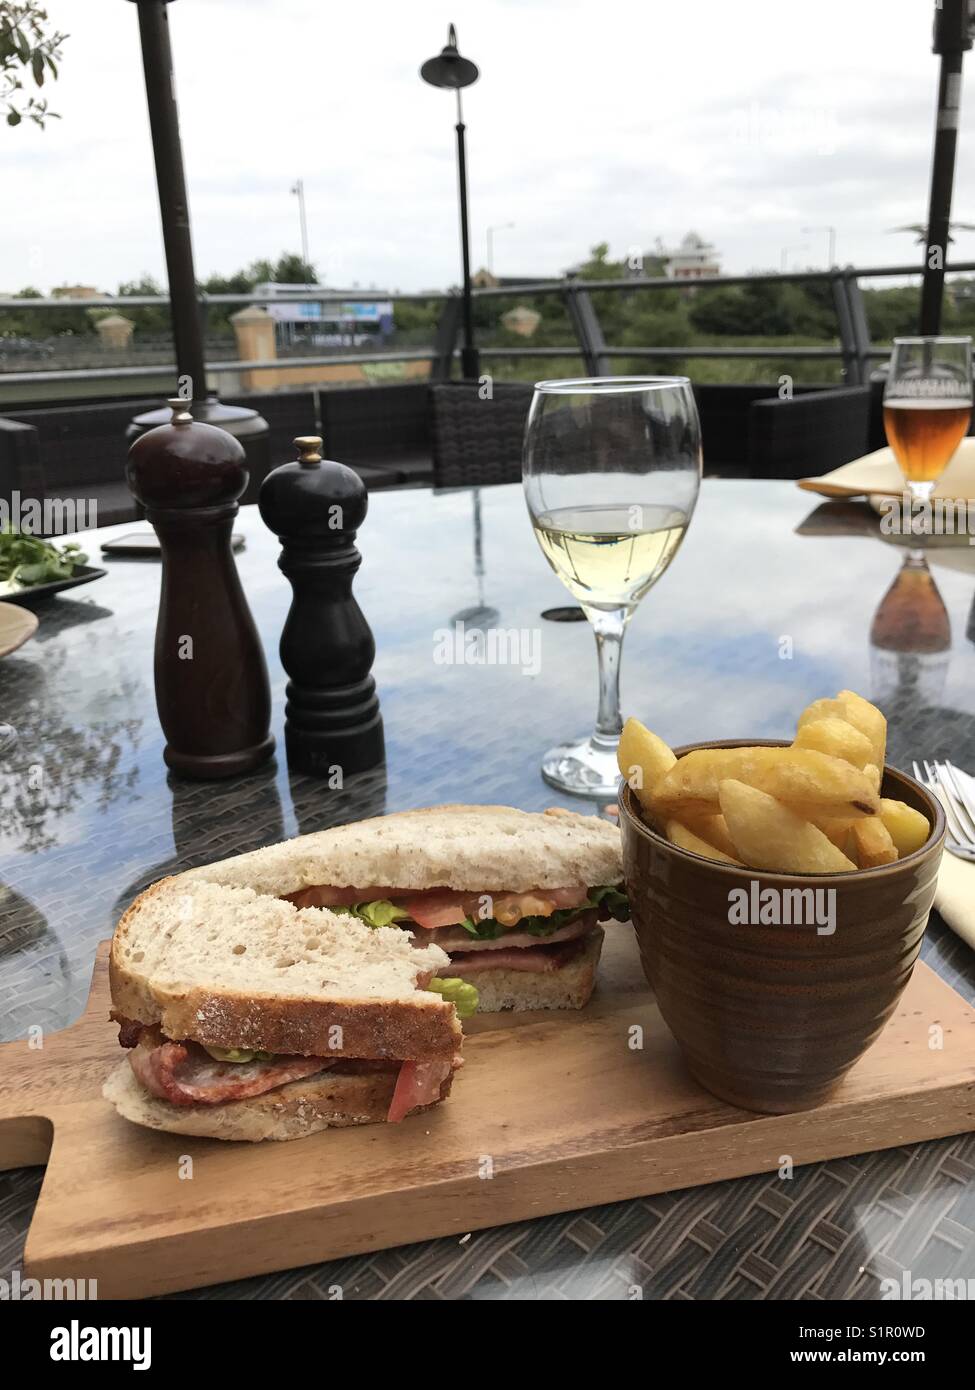 BLT sandwich with a side of chips and a glass of white wine, on a table outside, UK Stock Photo